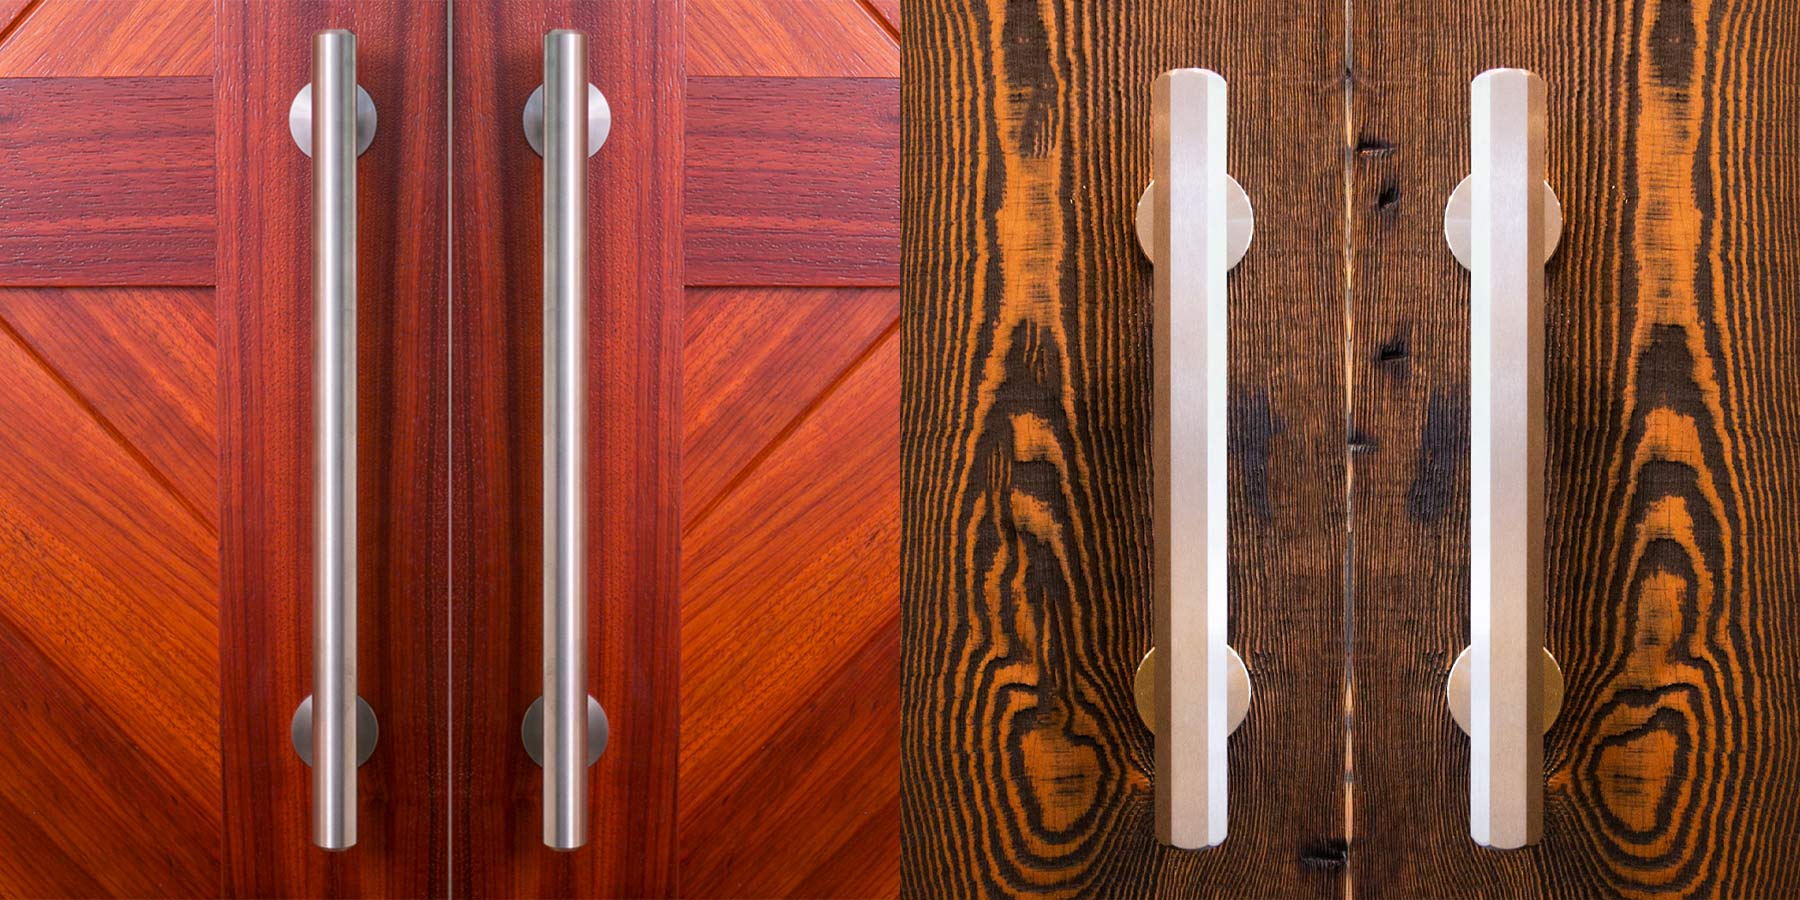 Two sets of stainless steel handles side by side. One installed on red wood doors and the other on reclaimed wood doors.